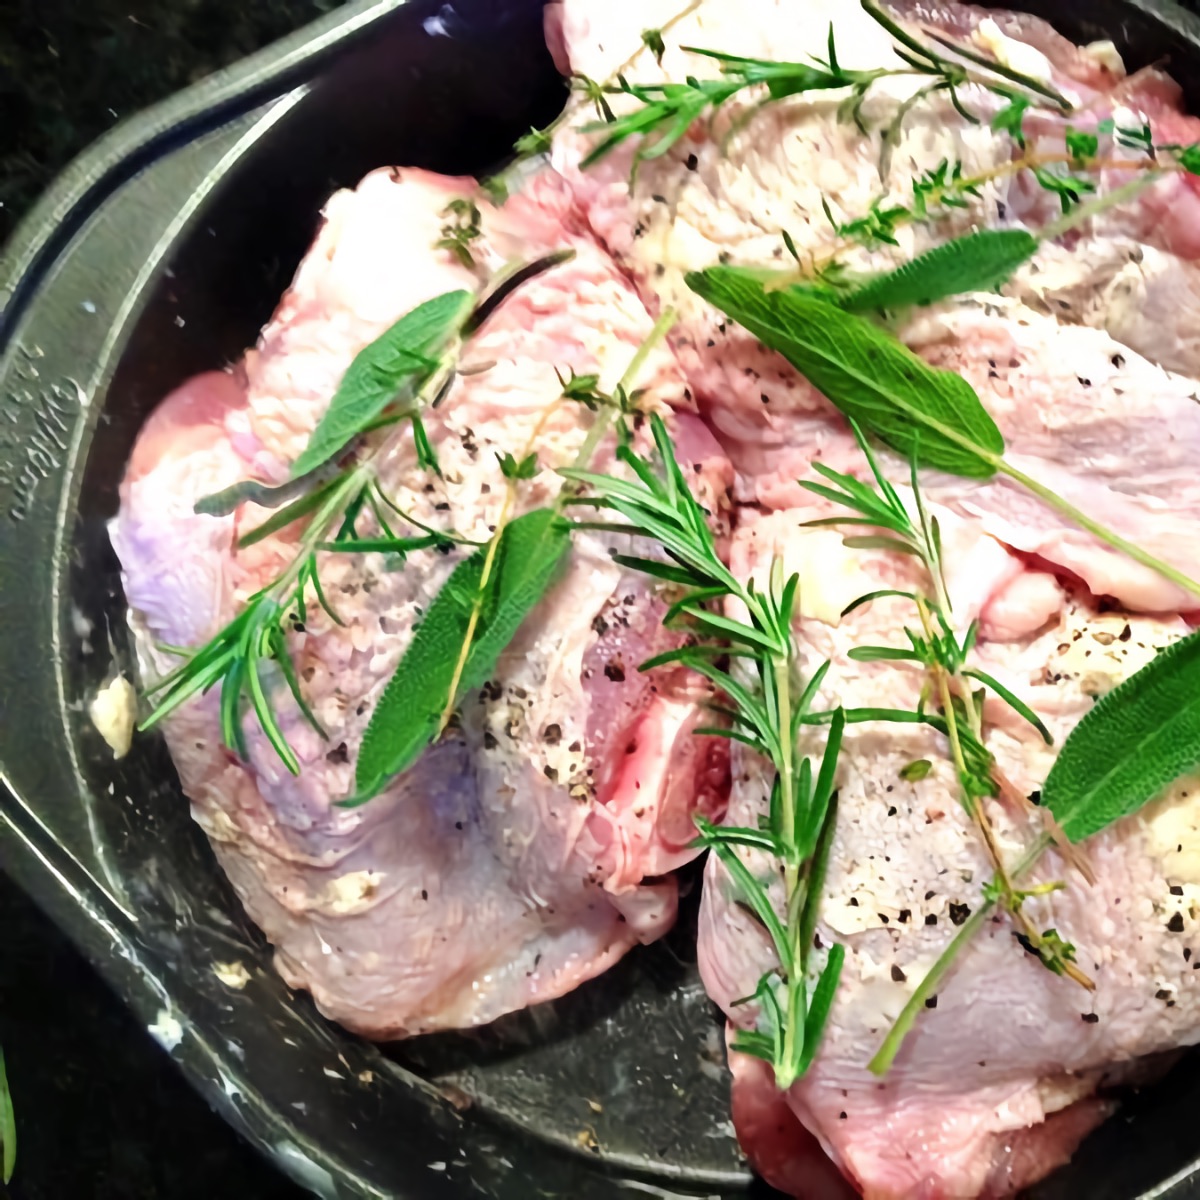 Turkey thighs topped with herbs and butter for extra drippings that will be used to make easy turkey gravy.